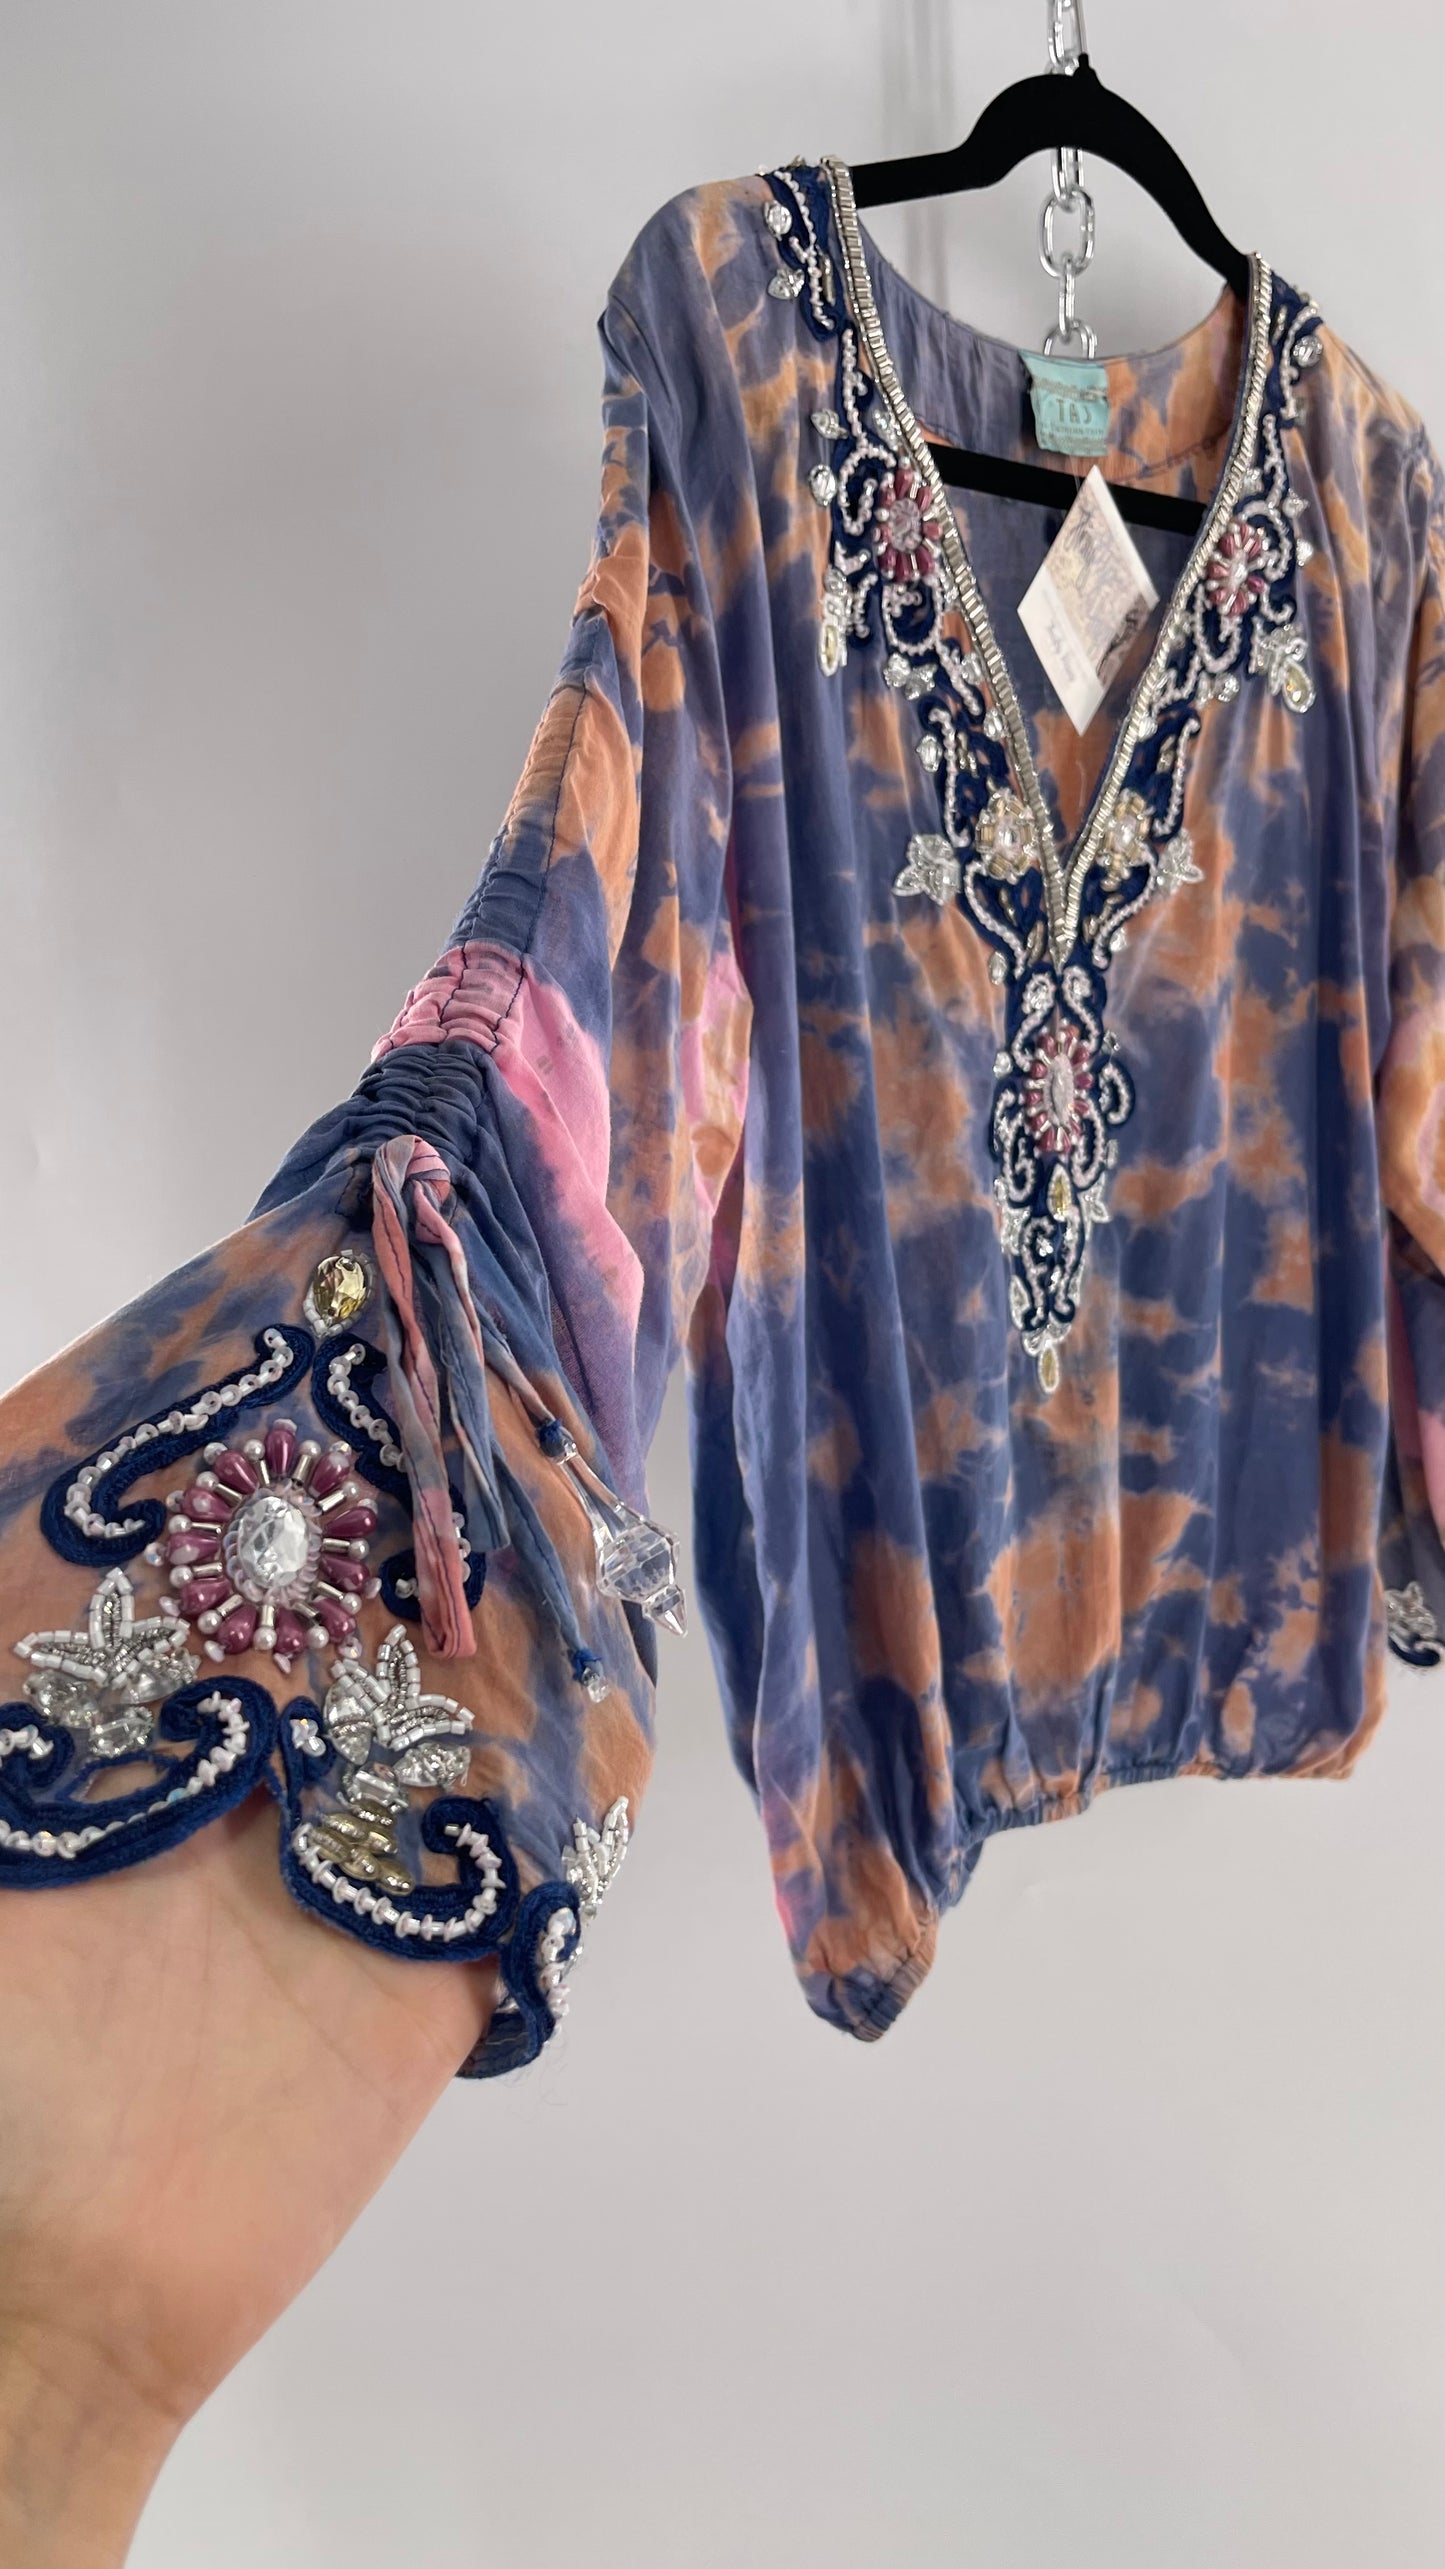 TAJ by Sabrina Crippa Tie Dye Blouse with Gemstone Encrusted Neckline and Ruched Beaded Sleeves (S/M)